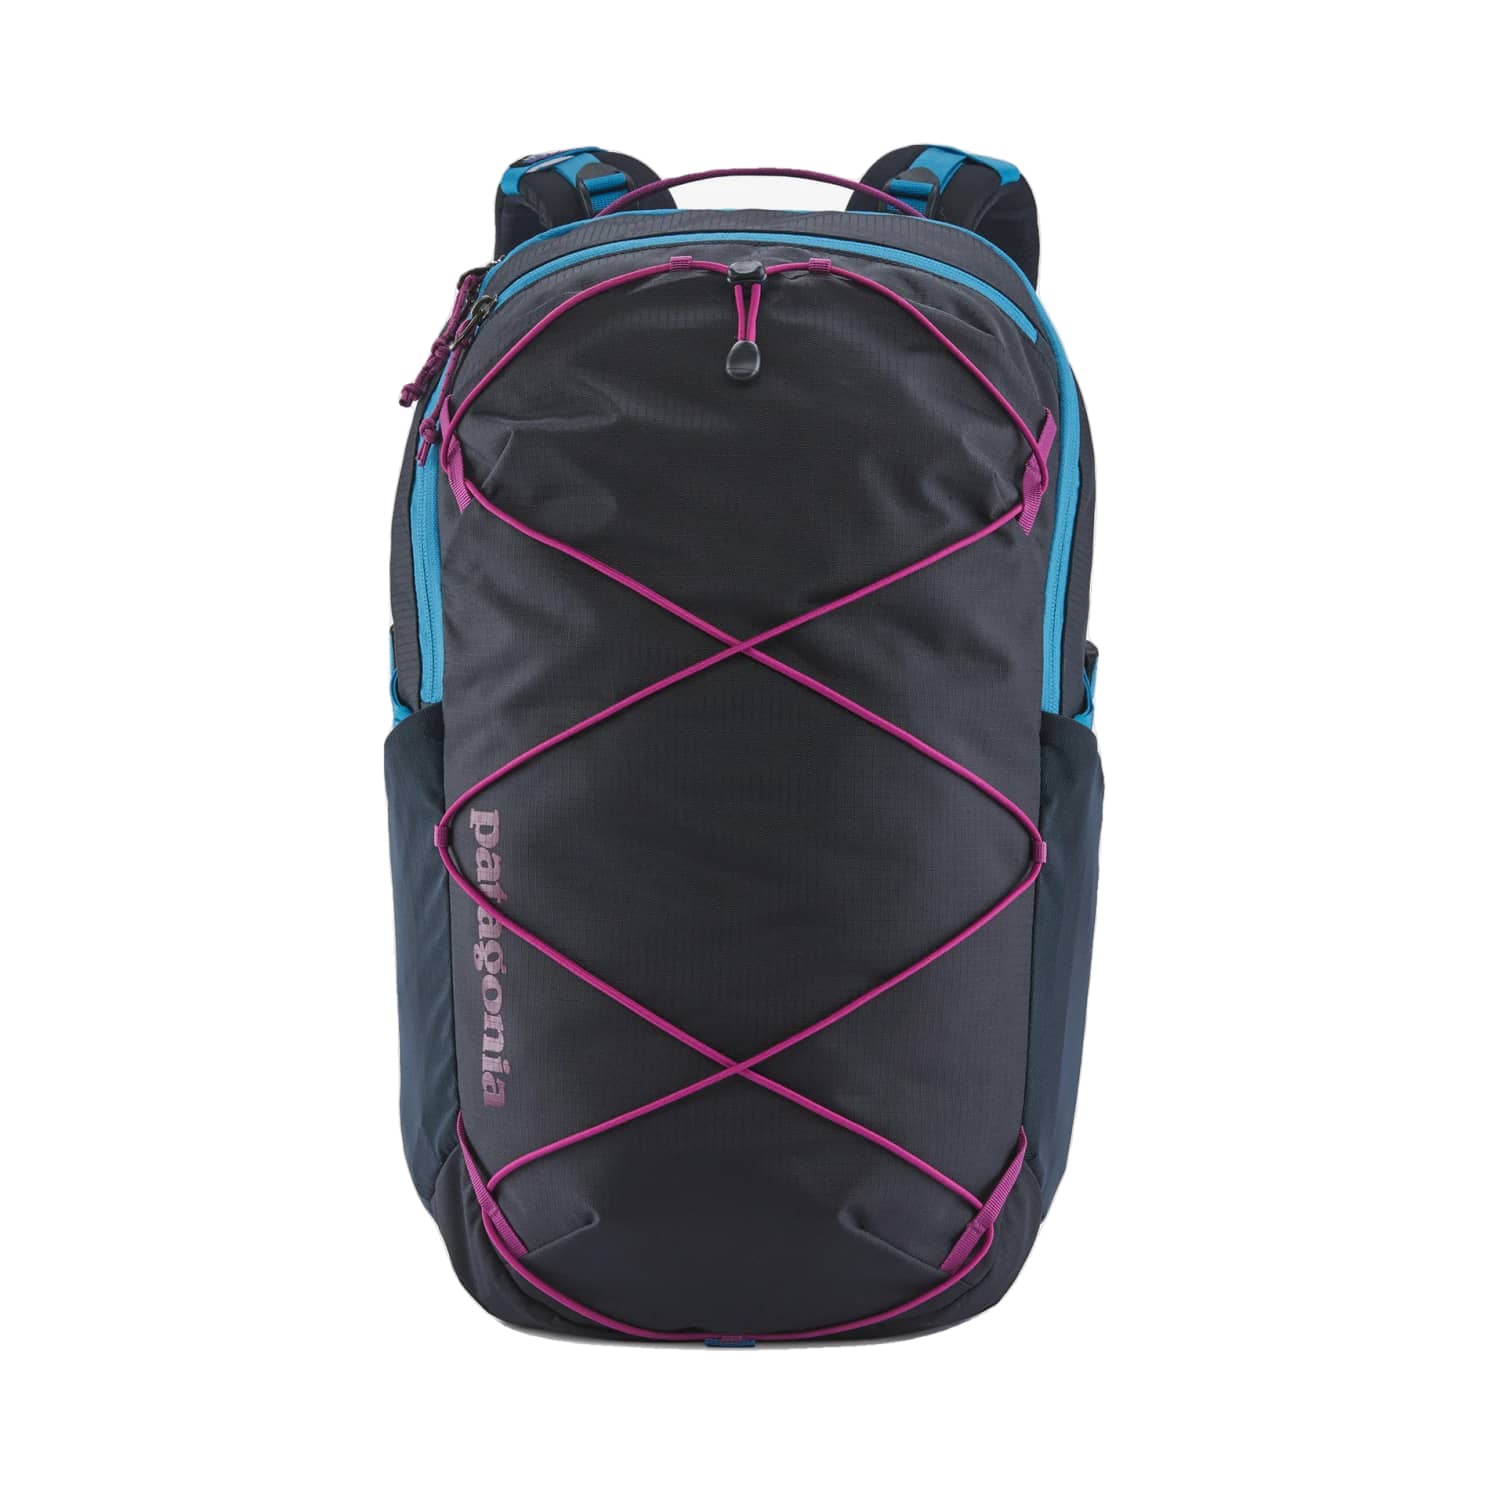 Patagonia Refugio Daypack 30L shown in Pitch Blue, front view.